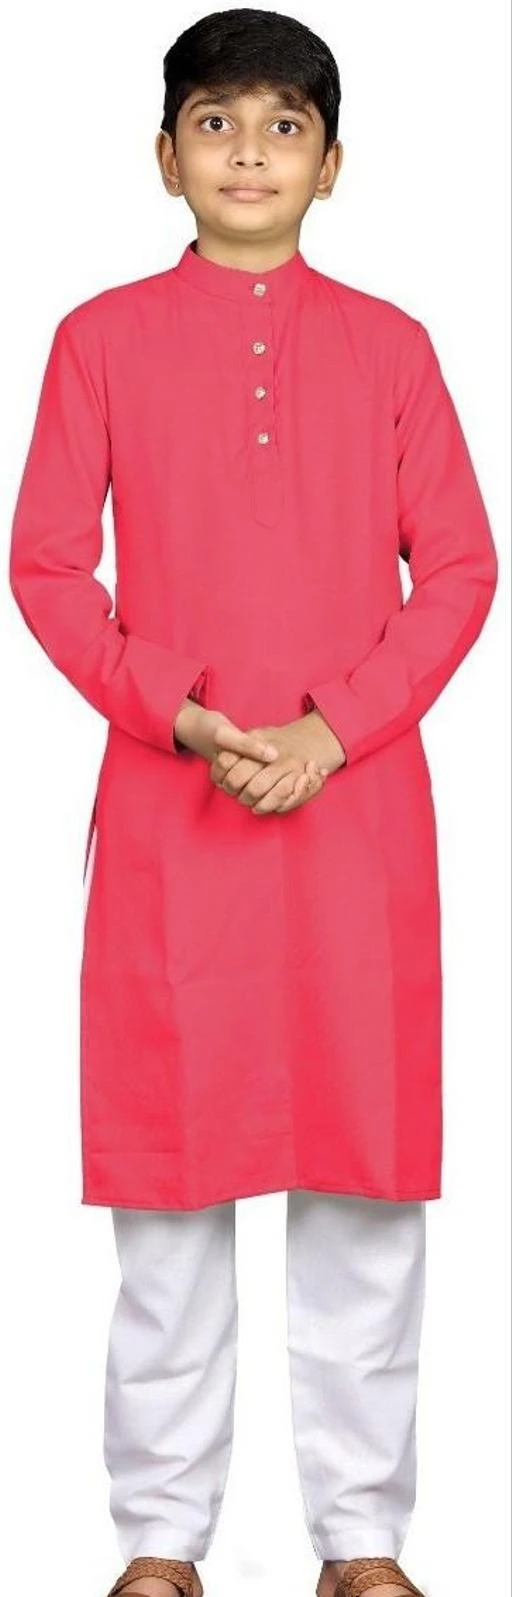 Checkout this latest Kurta Sets
Product Name: *THE HELL SHOP Boys Festive & Party Kurta and Pyjama Set (Pink Pack of 1)*
Top Fabric: Cotton
Sleeve Length: Long Sleeves
Bottom Type: churidar
Top Pattern: Solid
Net Quantity (N): 1
This ethnic wear for kids boys fabric has been designed keeping in mind the latest trends in a occassional fashion. Engineering garments which fit all body types and style is our aim. These pyjama kurta for boys party wear or regular wear are made with superior quality very soft fabric and comfortable wear. For one of those big parties just pair the set with a Modi Jacket or Nehru Jackets for boys stylish to avoid carrying a servani or sherwani for kids boy.
Sizes: 
18-24 Months, 3-4 Years, 5-6 Years, 7-8 Years, 9-10 Years, 11-12 Years, 13-14 Years, 15-16 Years
Country of Origin: India
Easy Returns Available In Case Of Any Issue


SKU: THSPINK
Supplier Name: BT Creation

Code: 074-150558050-999

Catalog Name: Princess Elegant Kids Boys Kurta Sets
CatalogID_45171262
M10-C32-SC1170